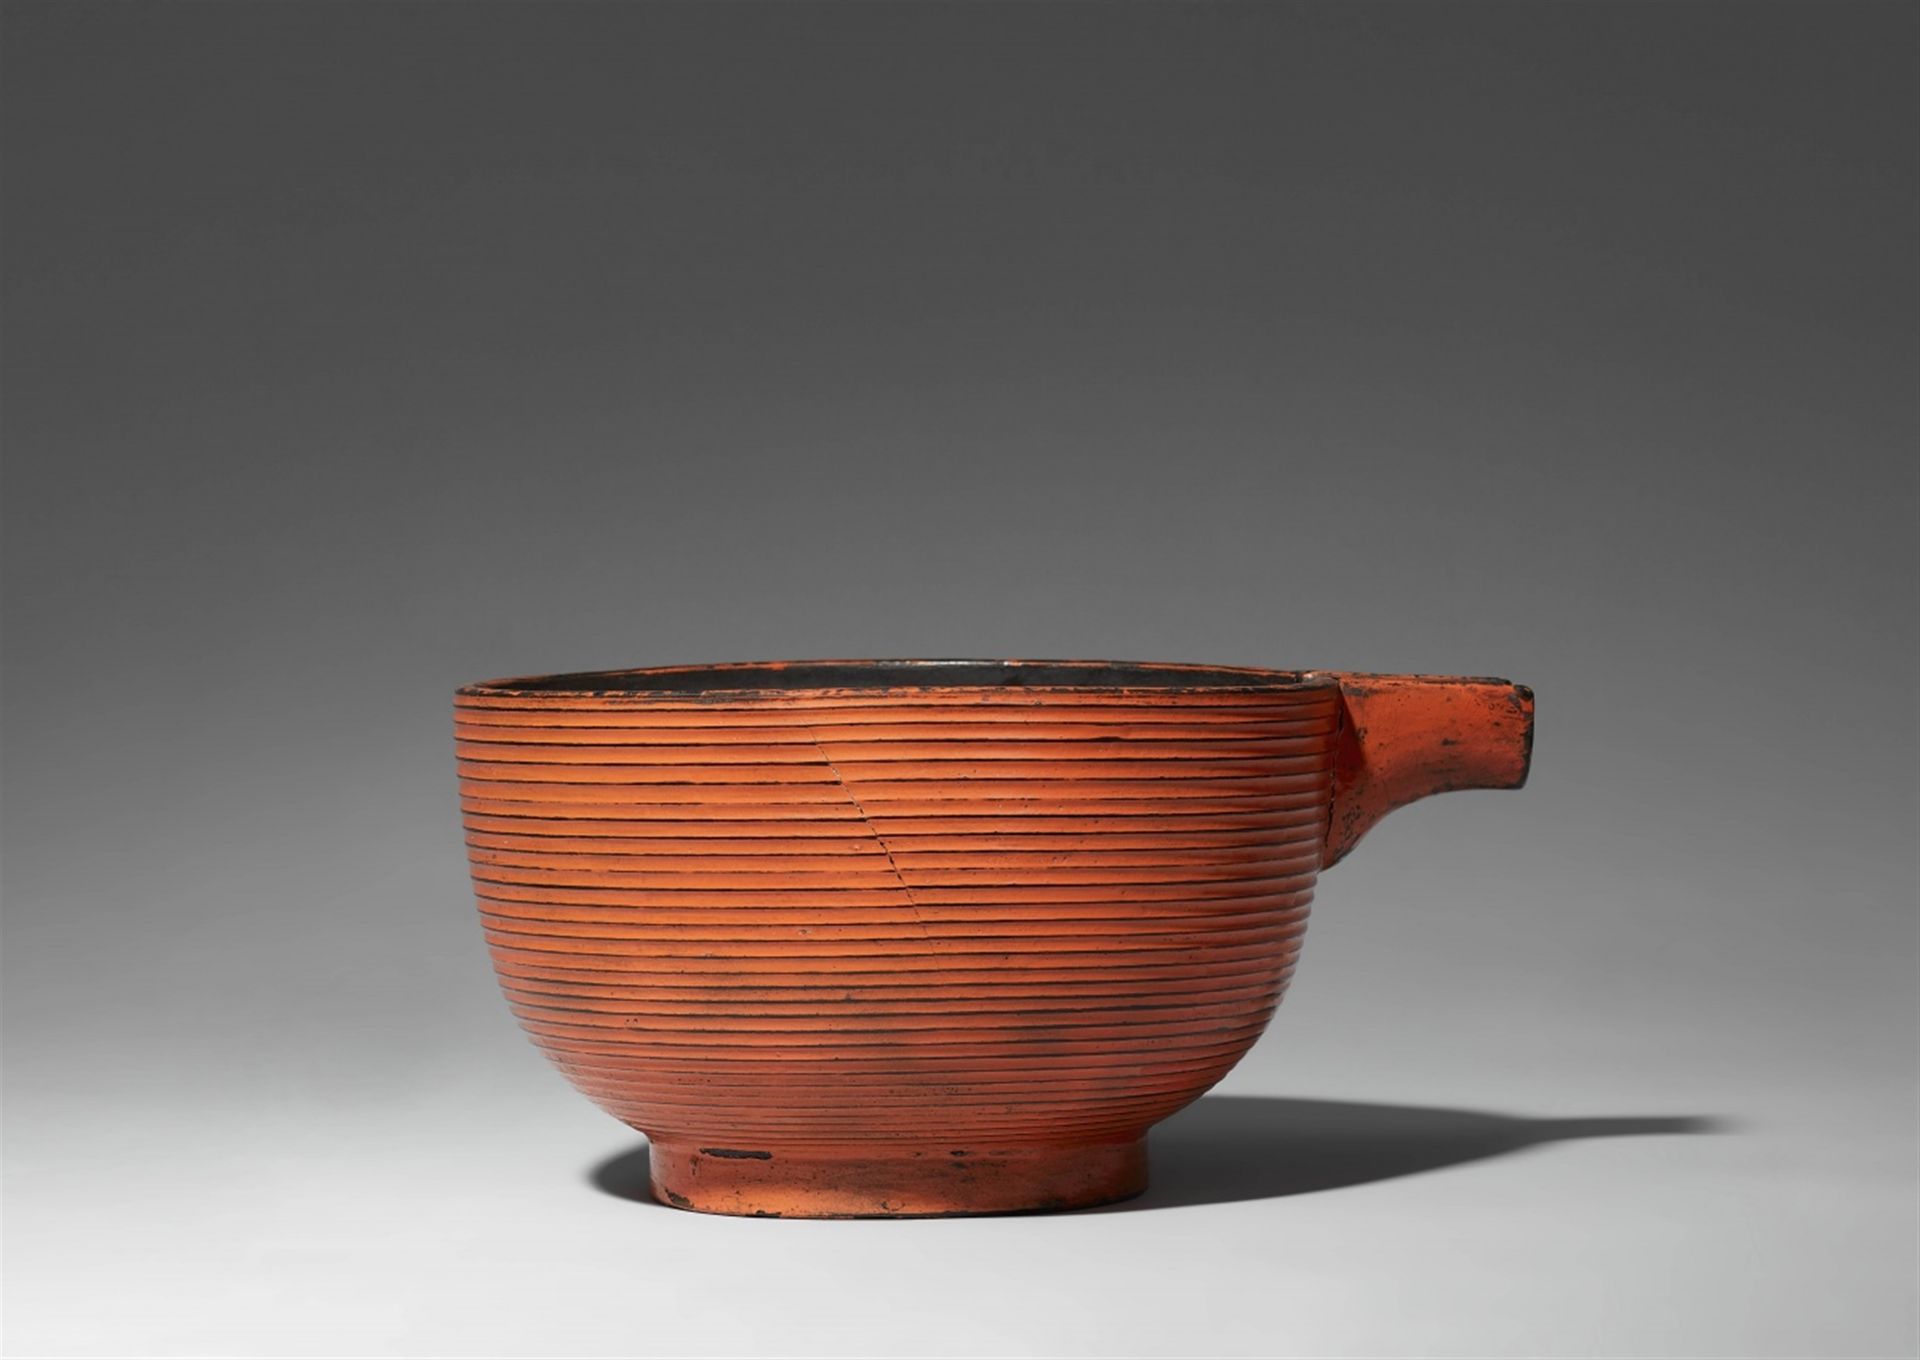 A large negoro-type bowl with a spout. Edo period